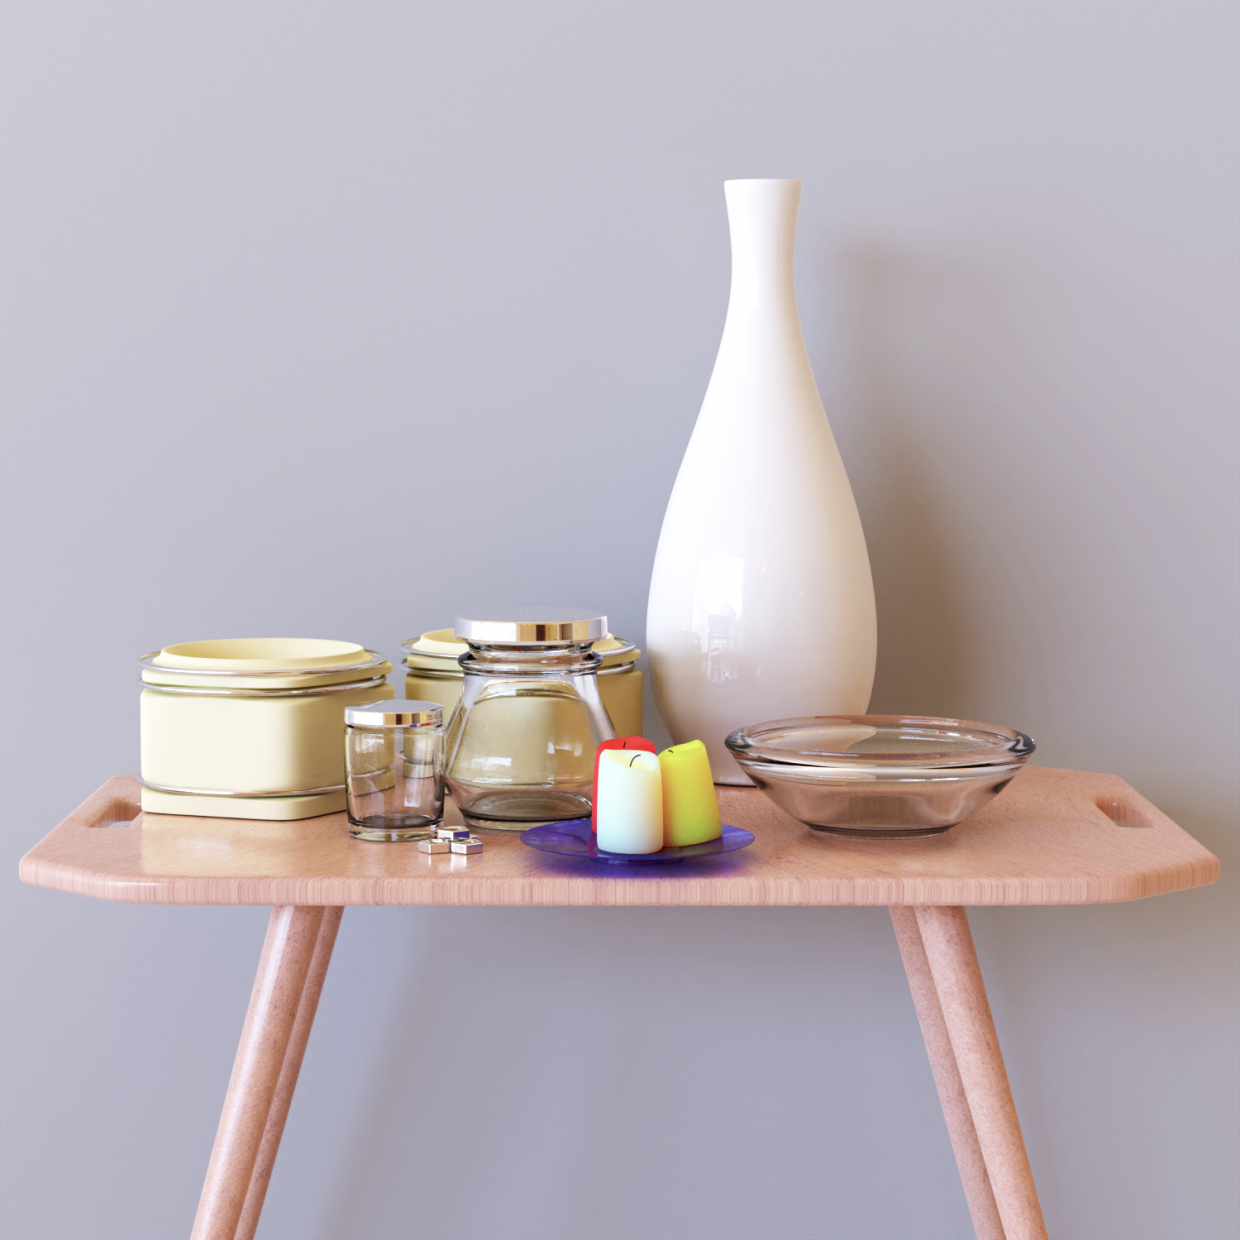 Table with objects in Blender cycles render image